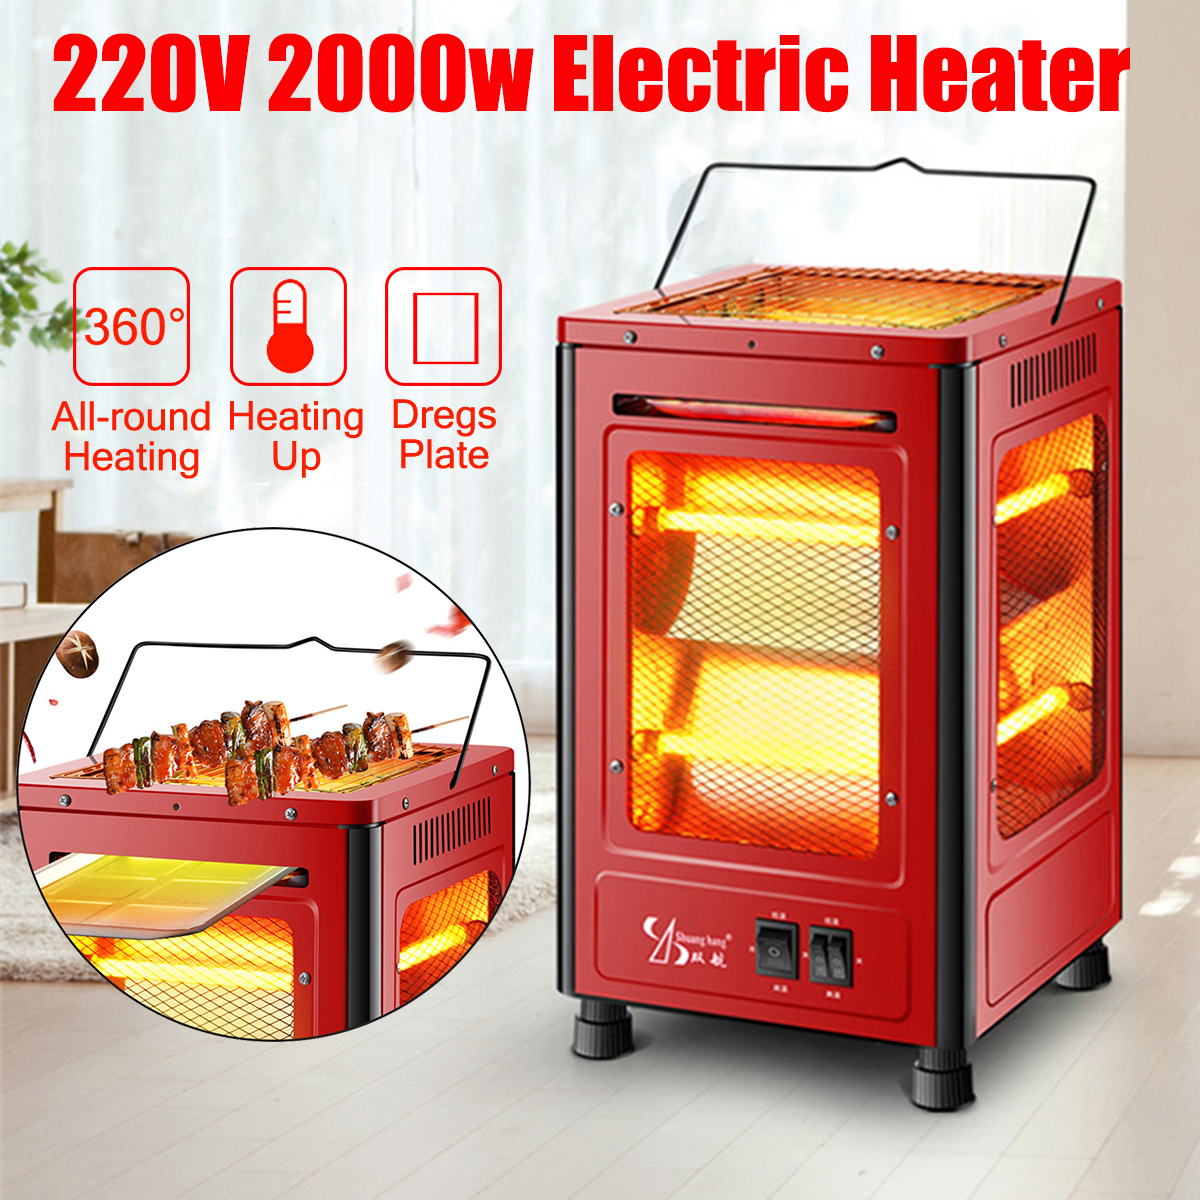 220V-2000W-Five-Sided-Heater-Grill-Type-Brazier-Heater-Energy-Saving-Vertical-Electric-Heater-1375379-1